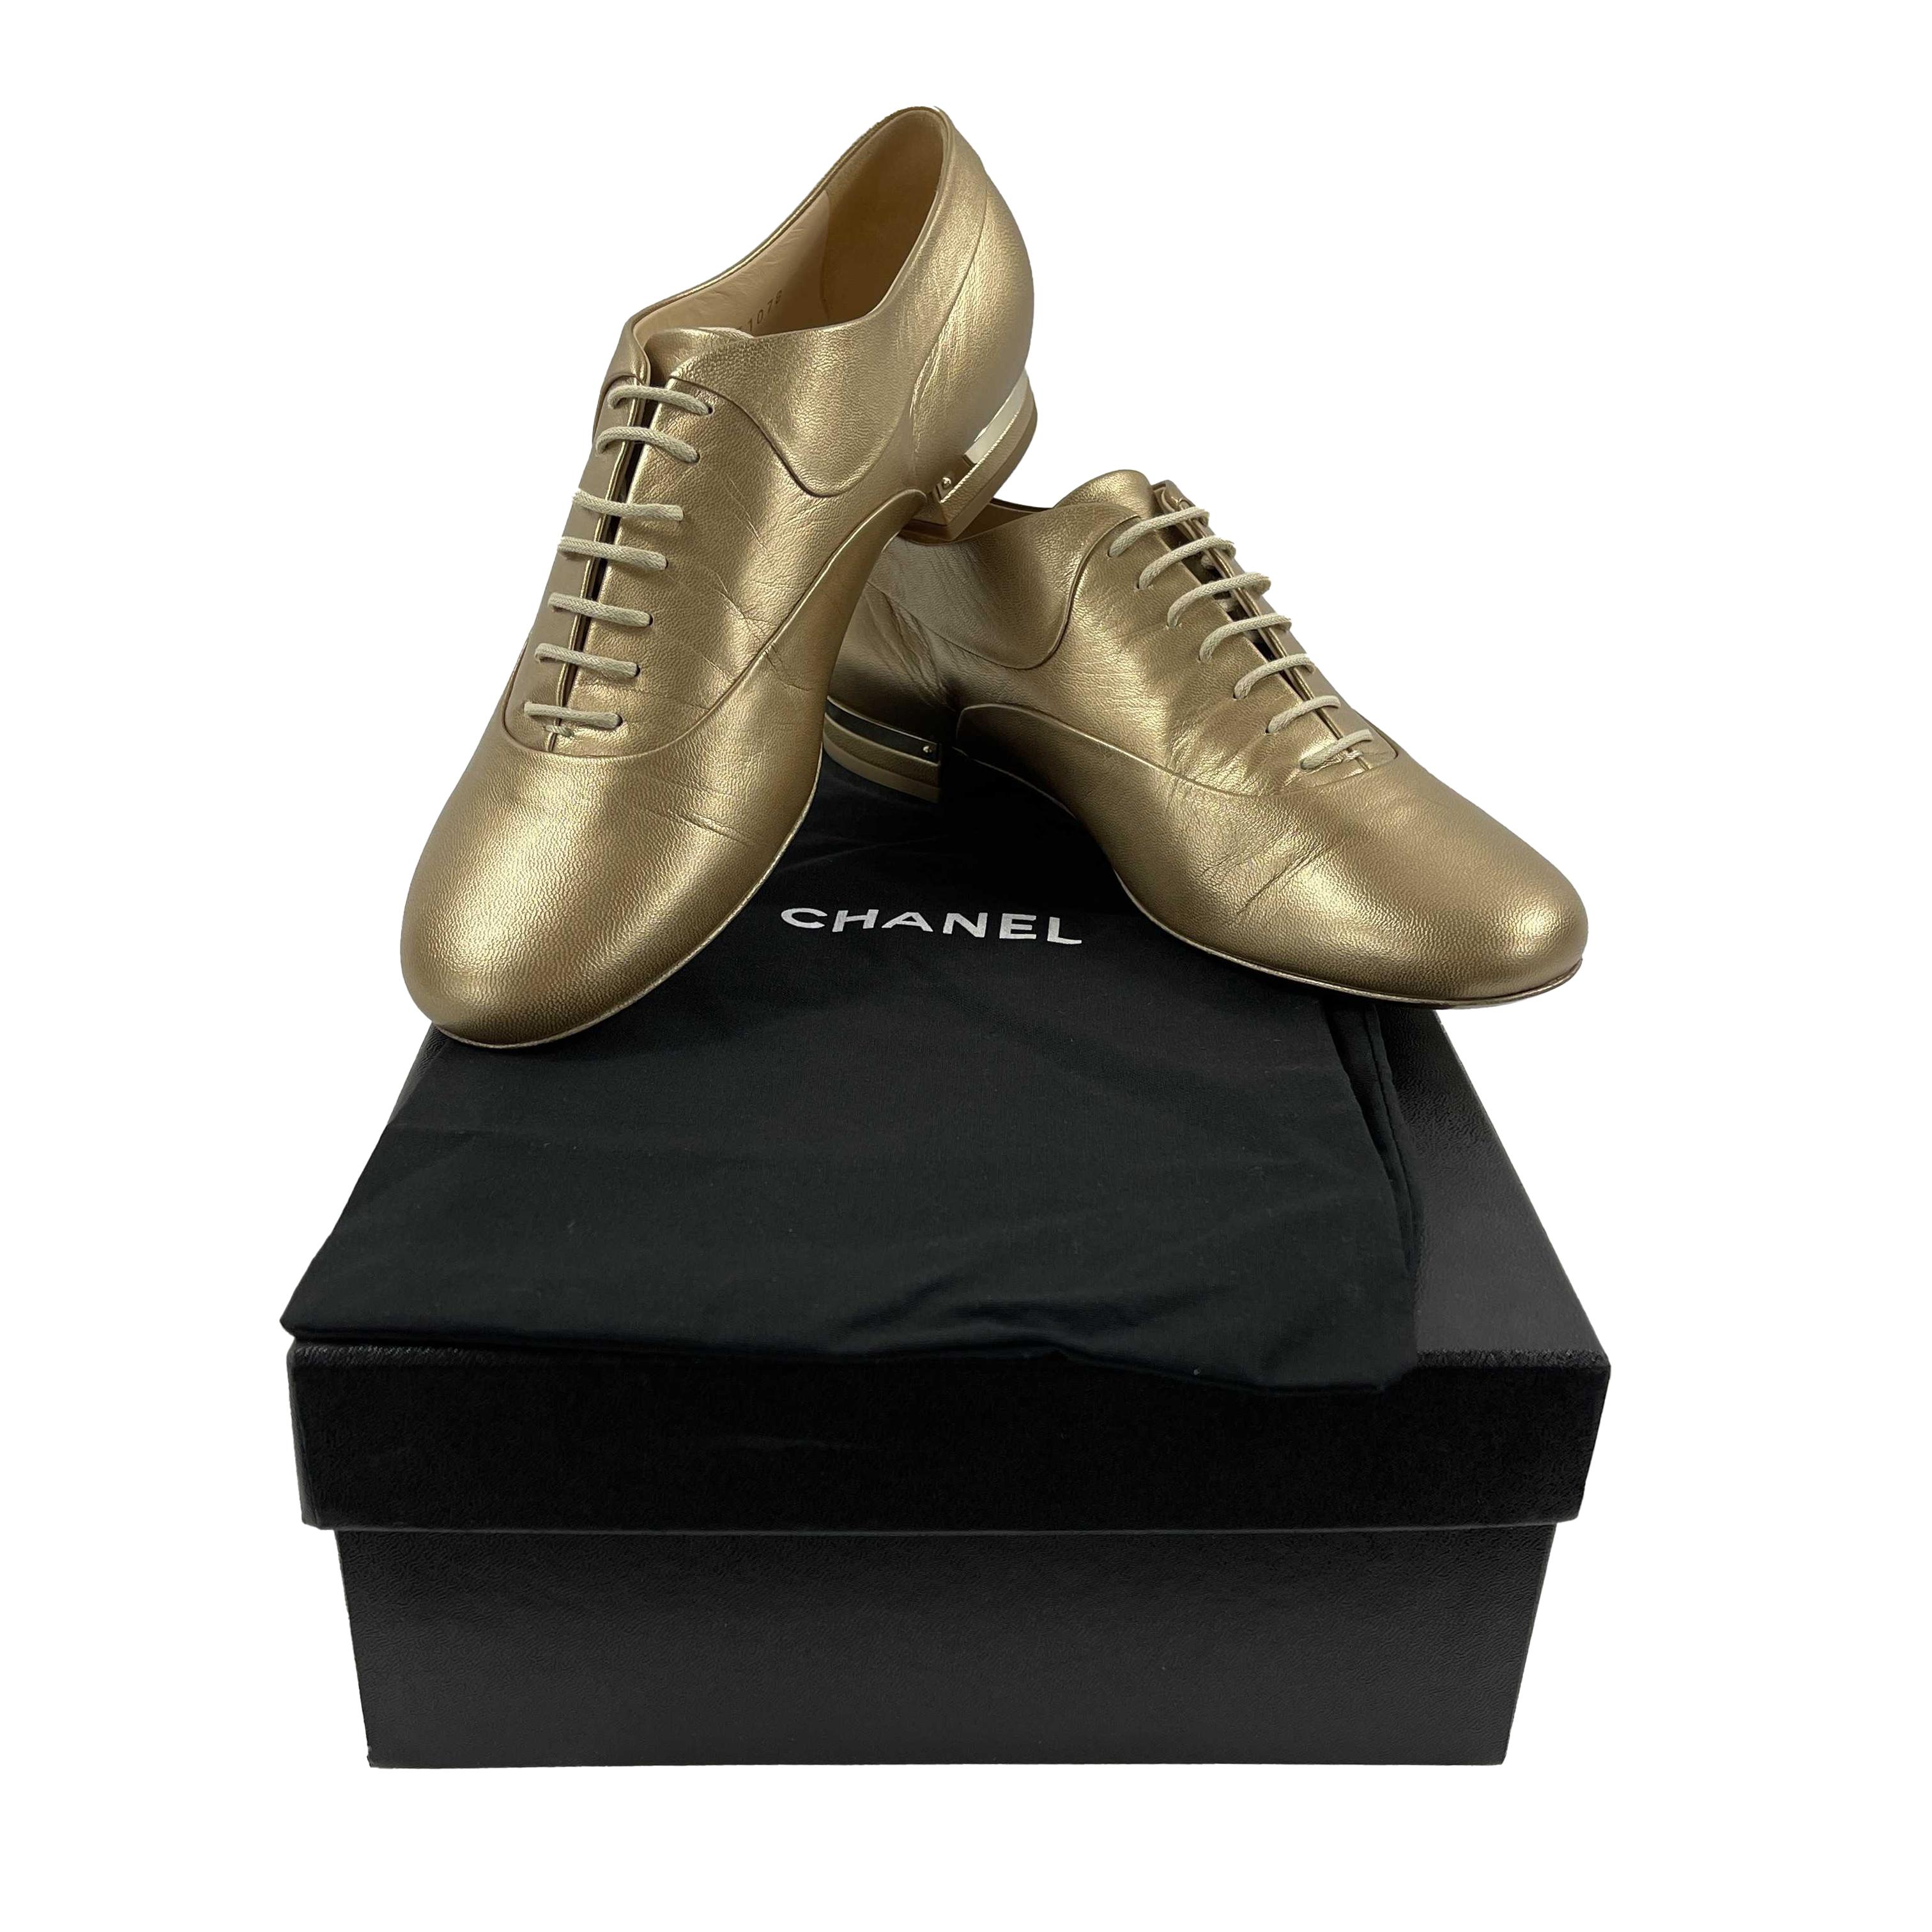 CHANEL NEW 2015 Metallic Gold Leather CC / Pearl Oxford Shoes 39 US 9 2